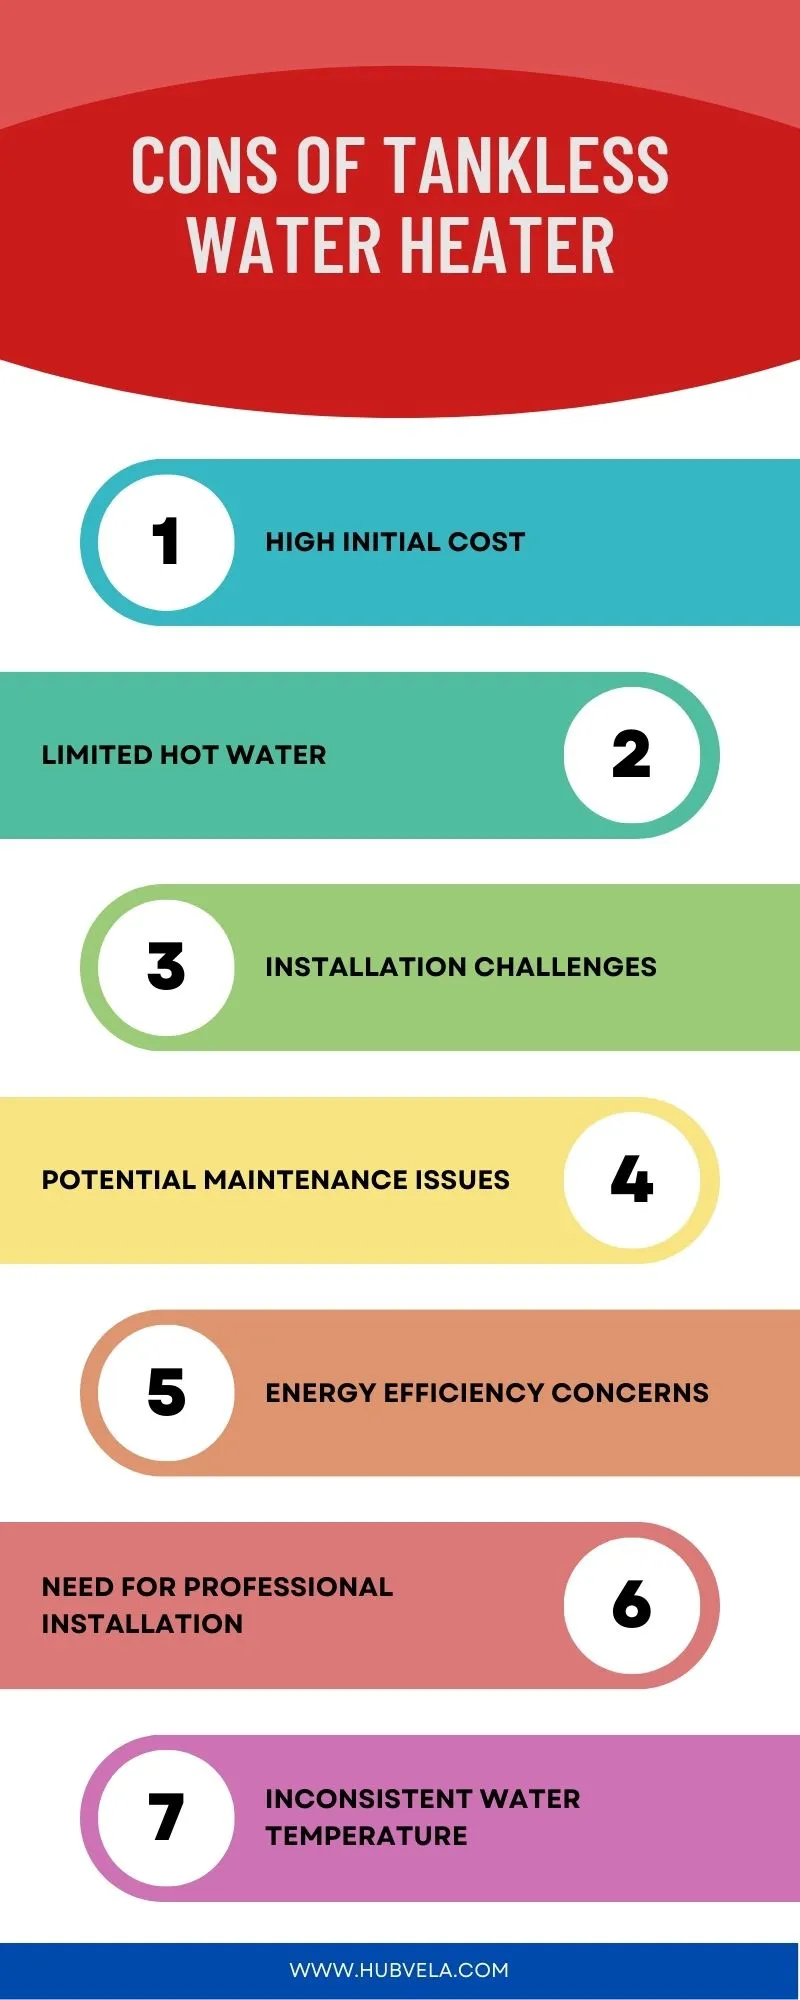 Cons of Tankless Water Heater Infographic